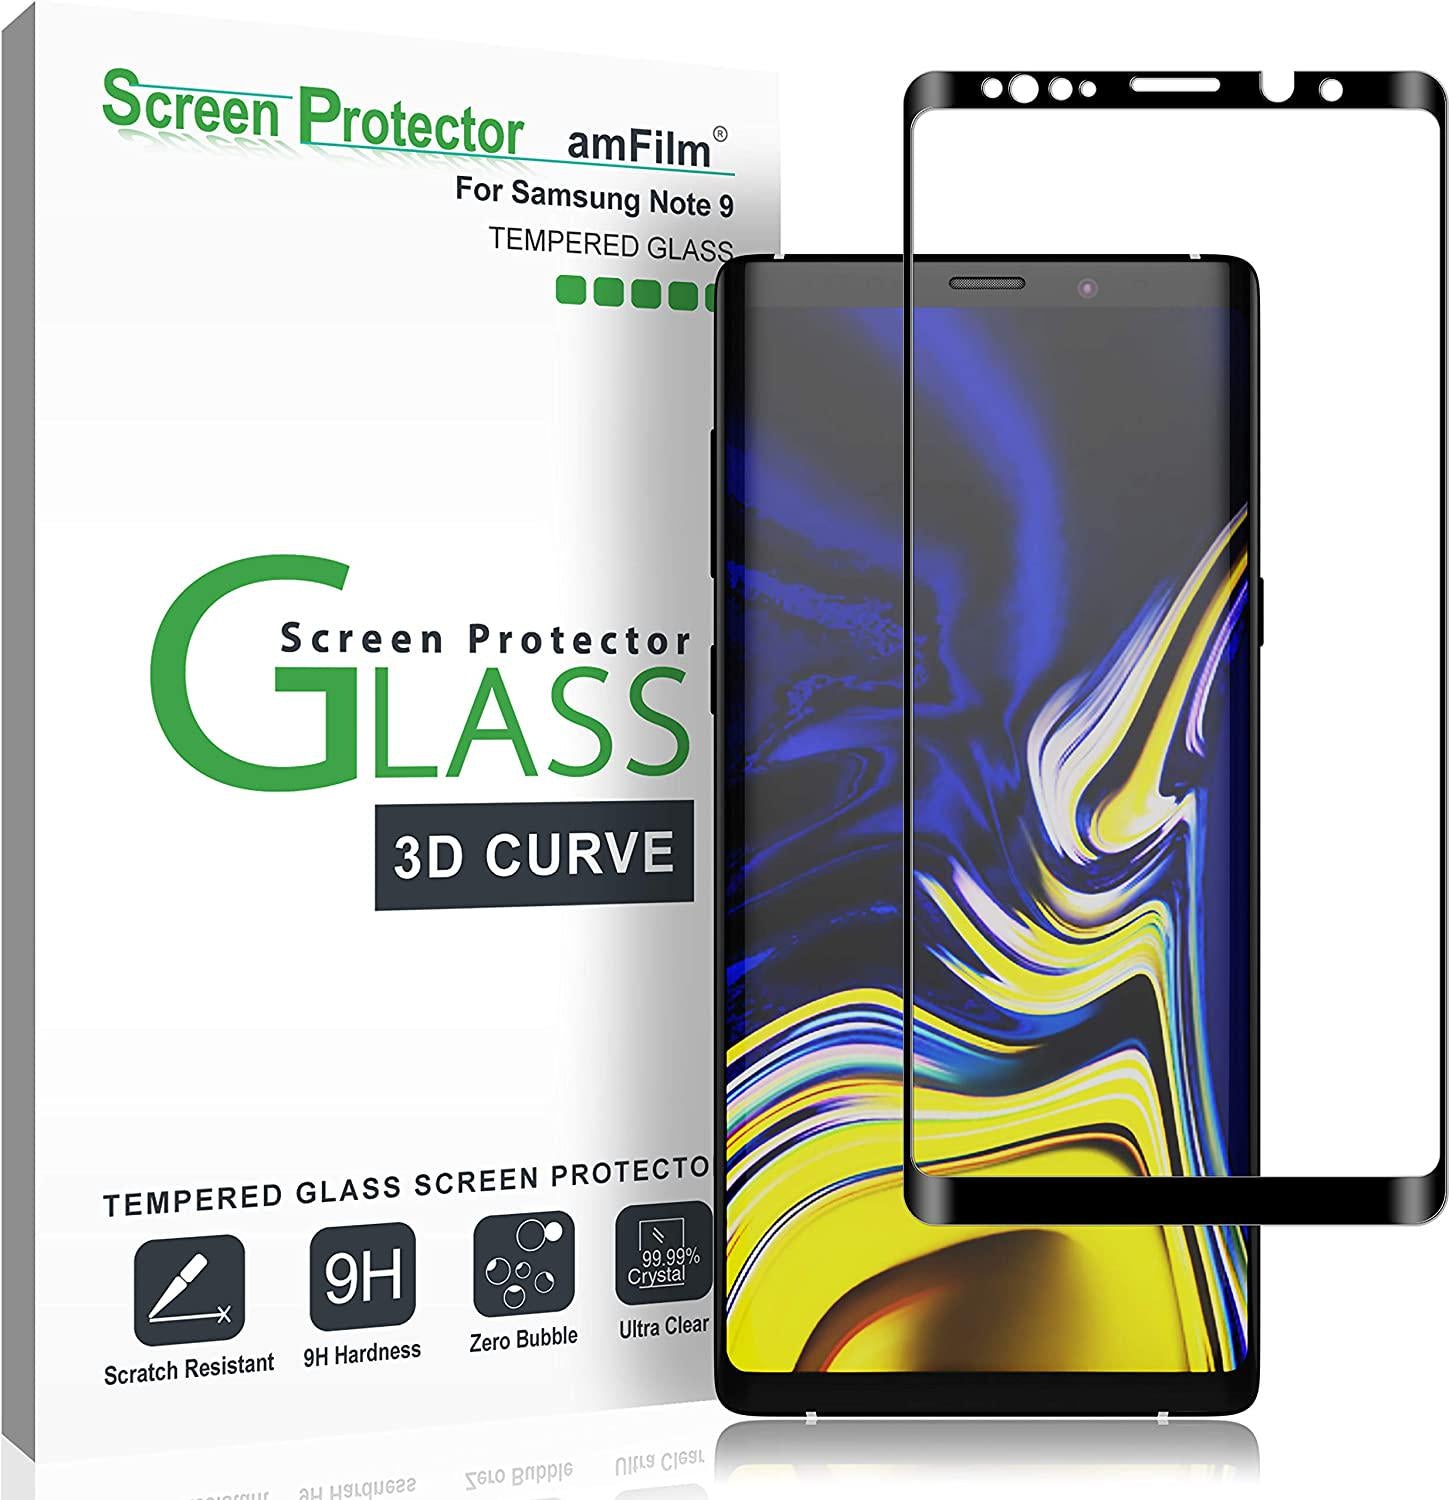 amFilm, Galaxy Note 9 Screen Protector Glass, amFilm Full Cover (3D Curved) Tempered Glass Screen Protector with Dot Matrix for Samsung Galaxy Note 9 (Black)